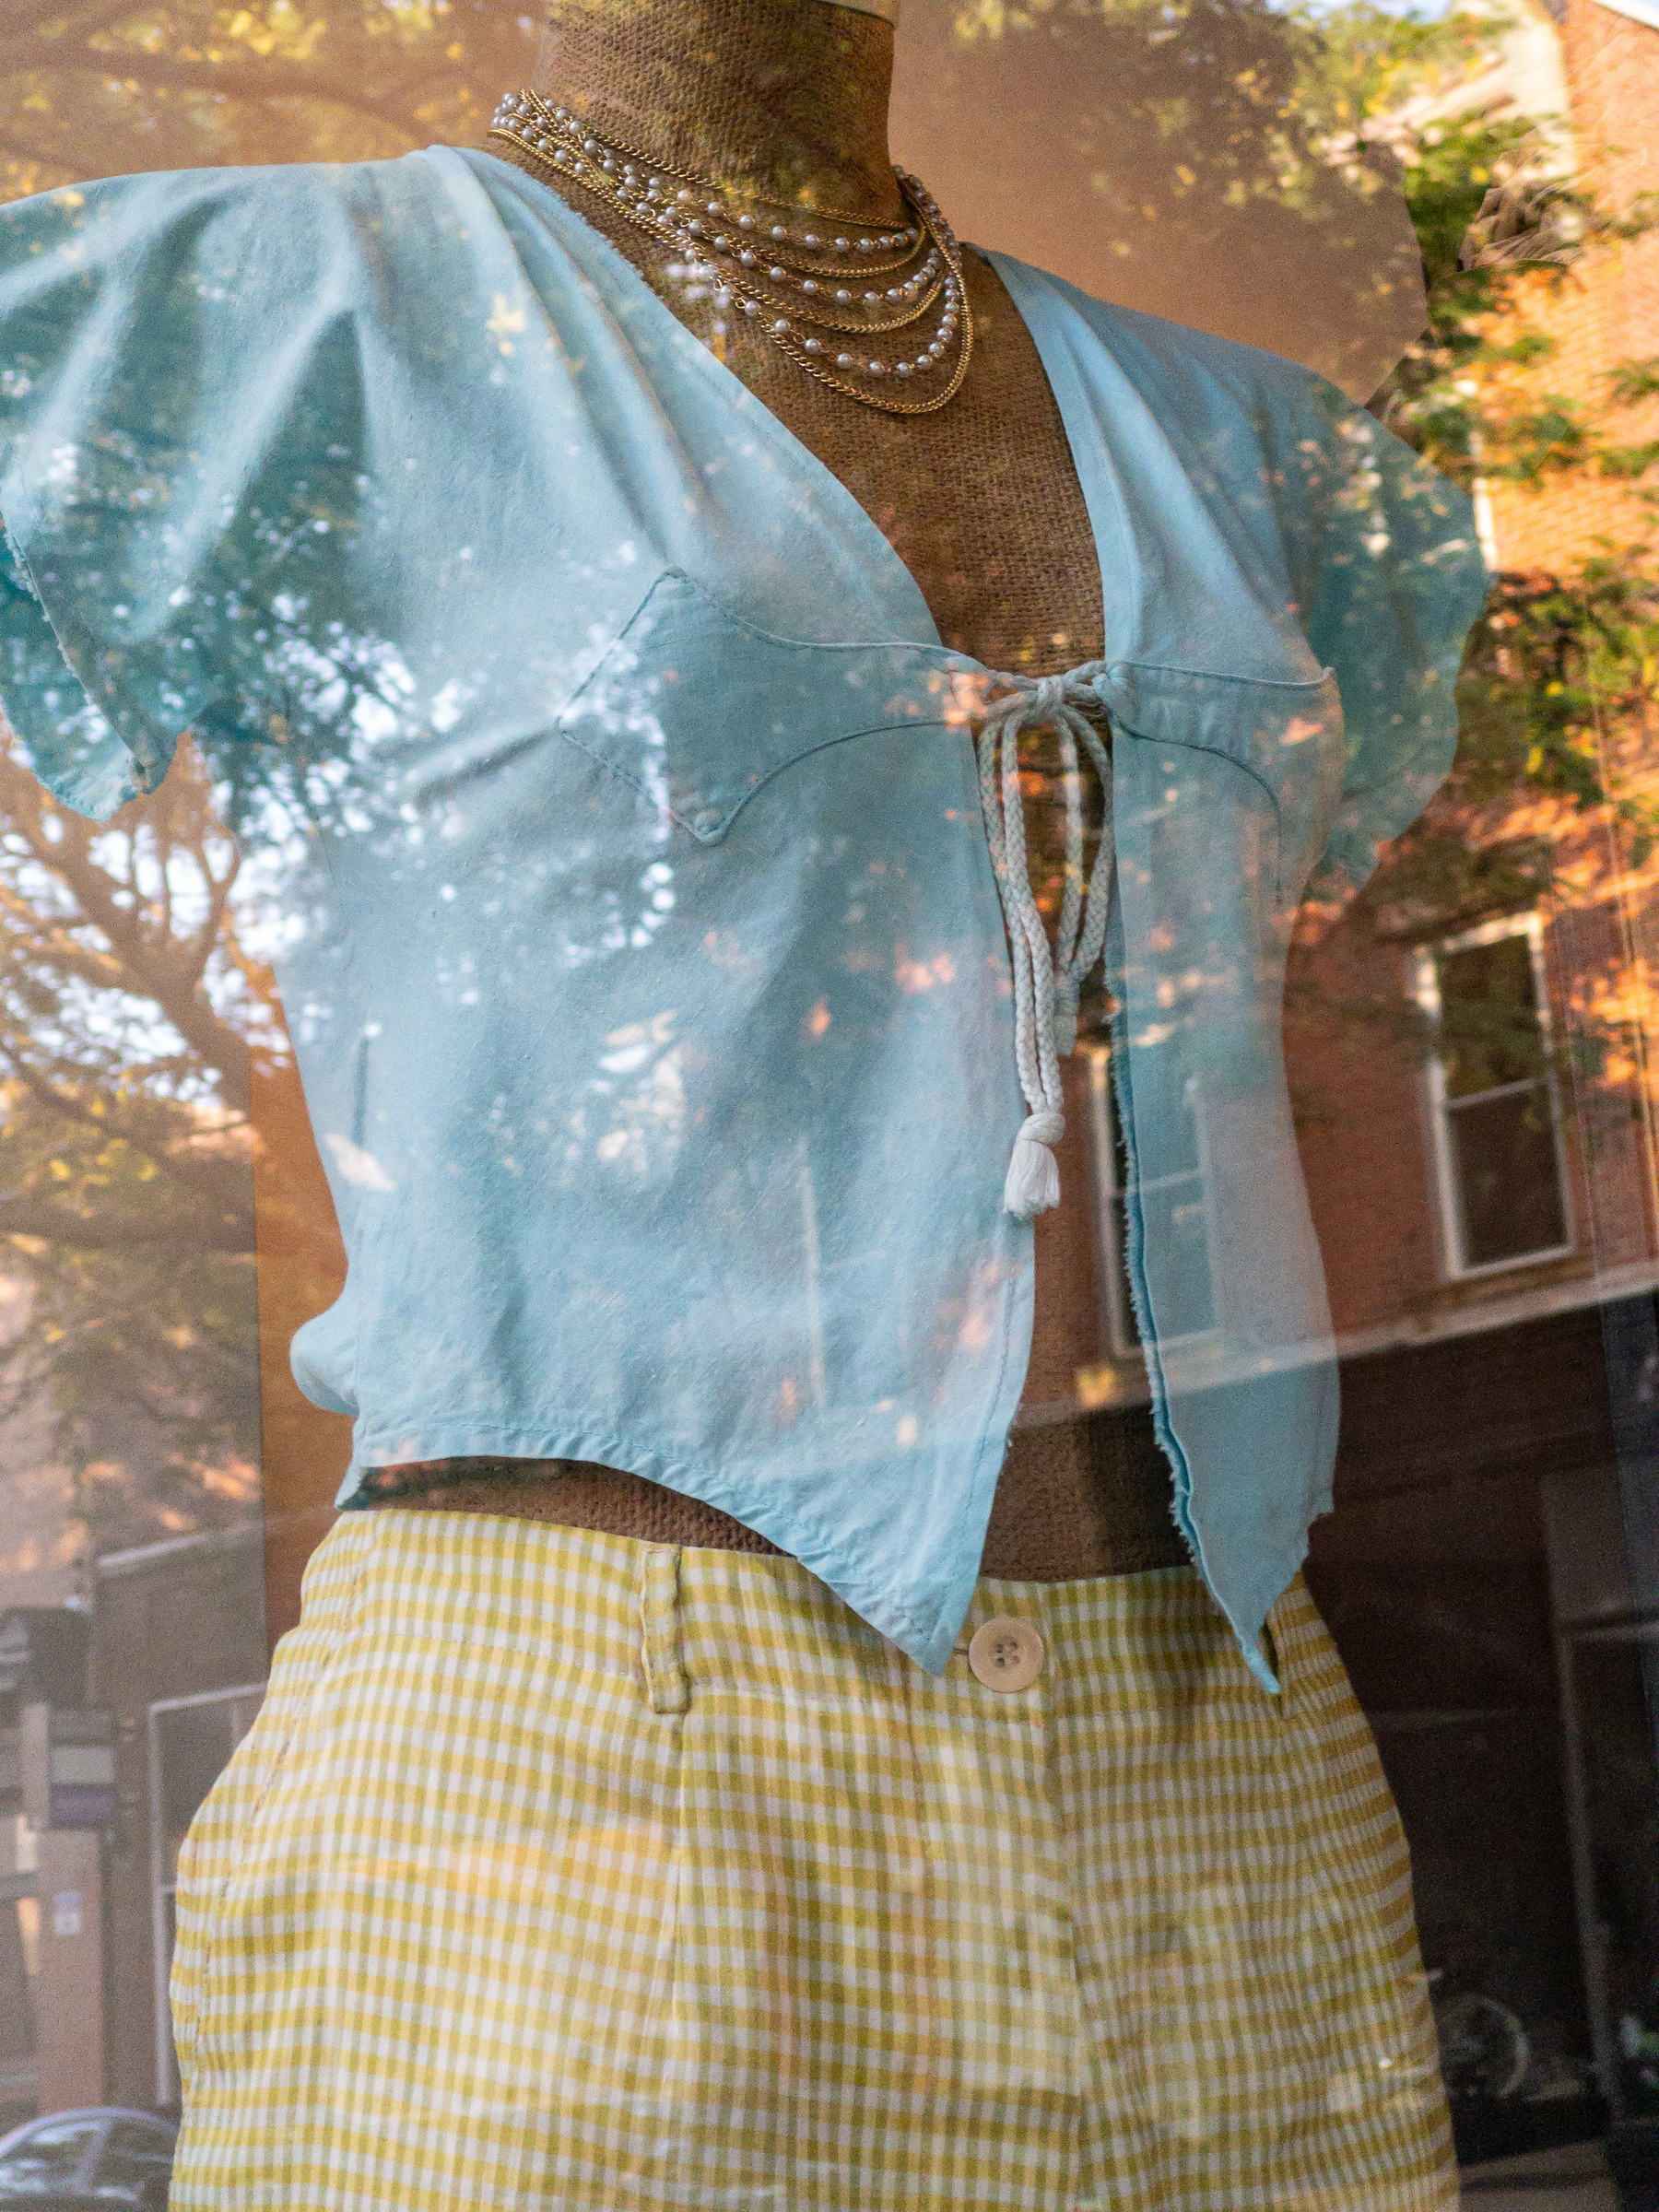 Woman’s light blue blouse open down the front, tied together at the bust line. Yellow seersucker pants. Displayed on an armless and headless mannequin form in a shop window.